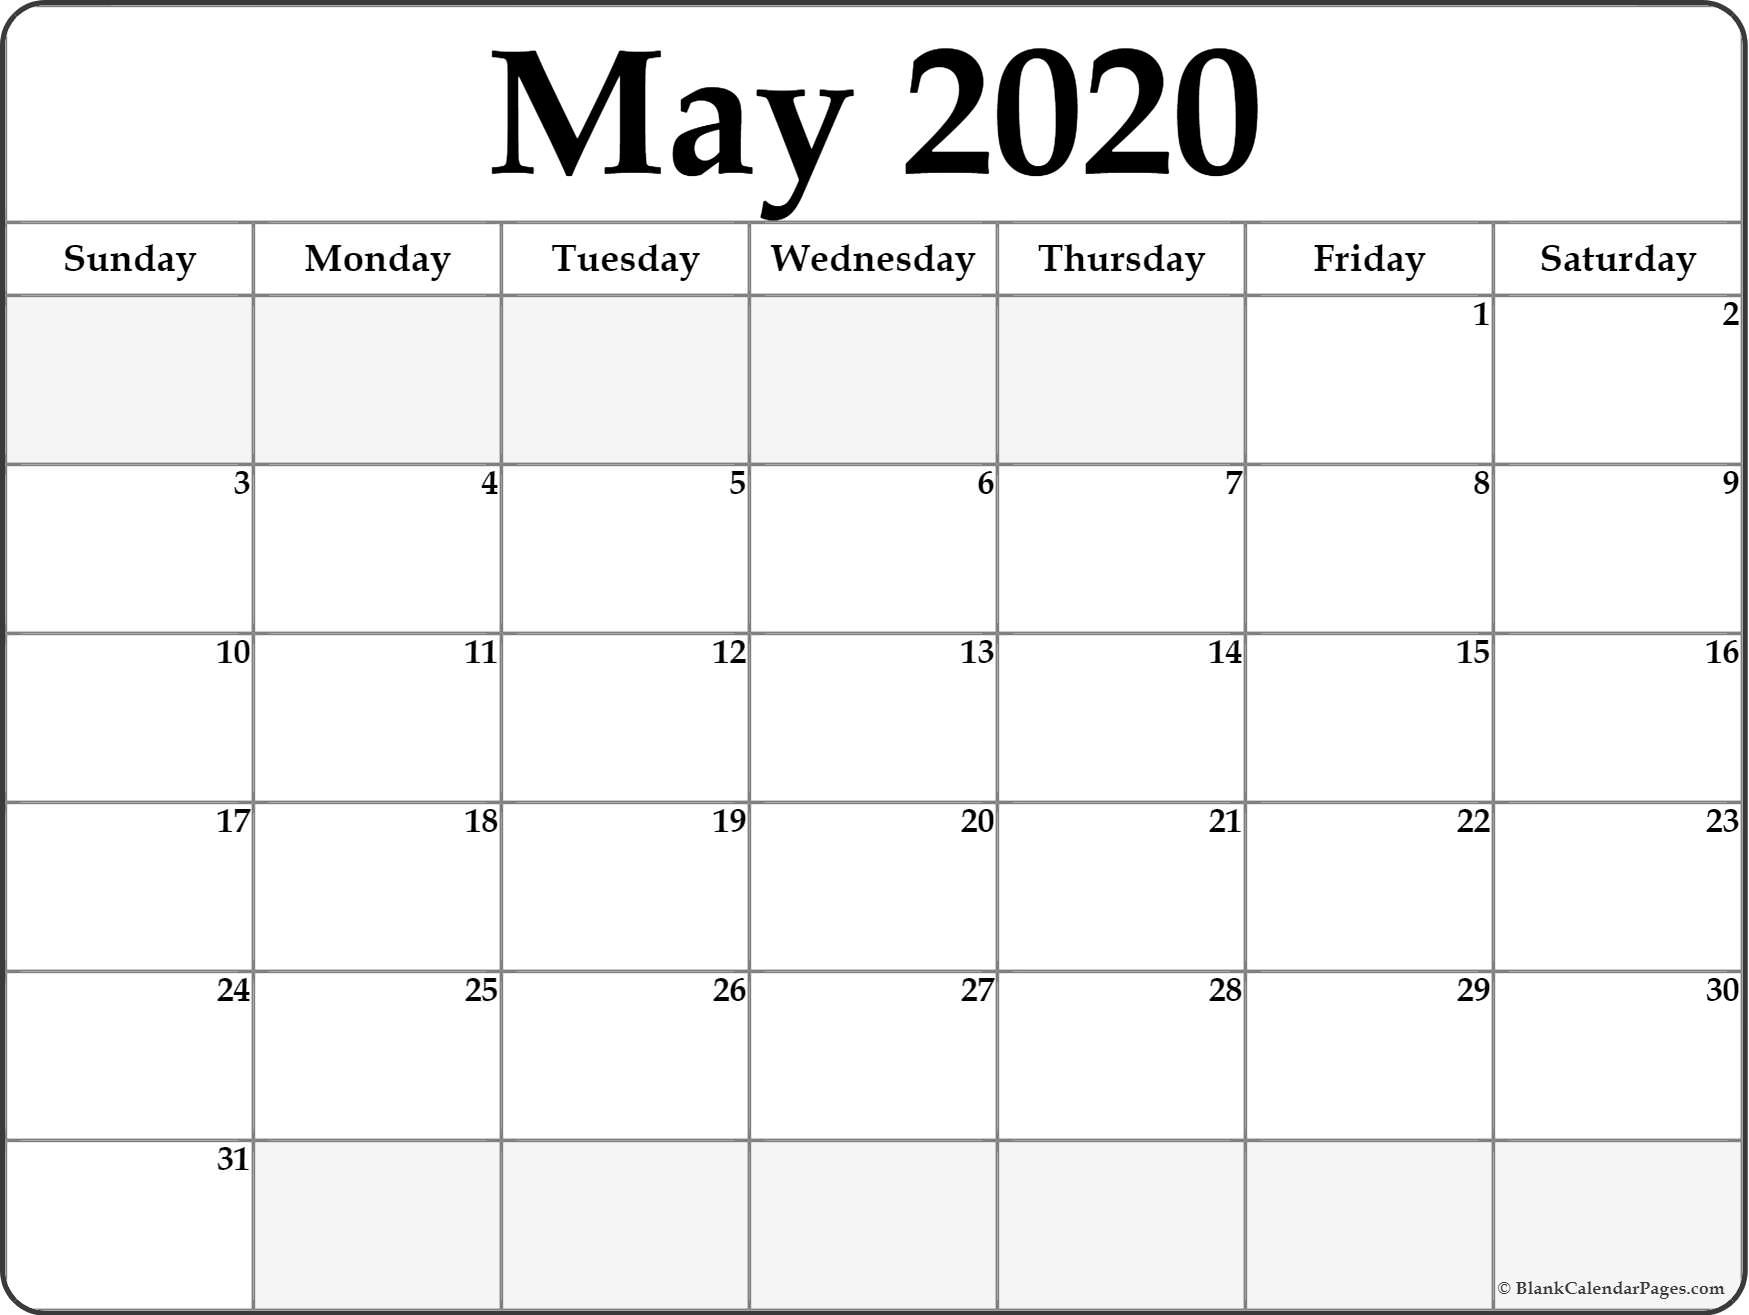 May 2020 Calendar | Free Printable Monthly Calendars-Monday To Sunday May 2020 Template